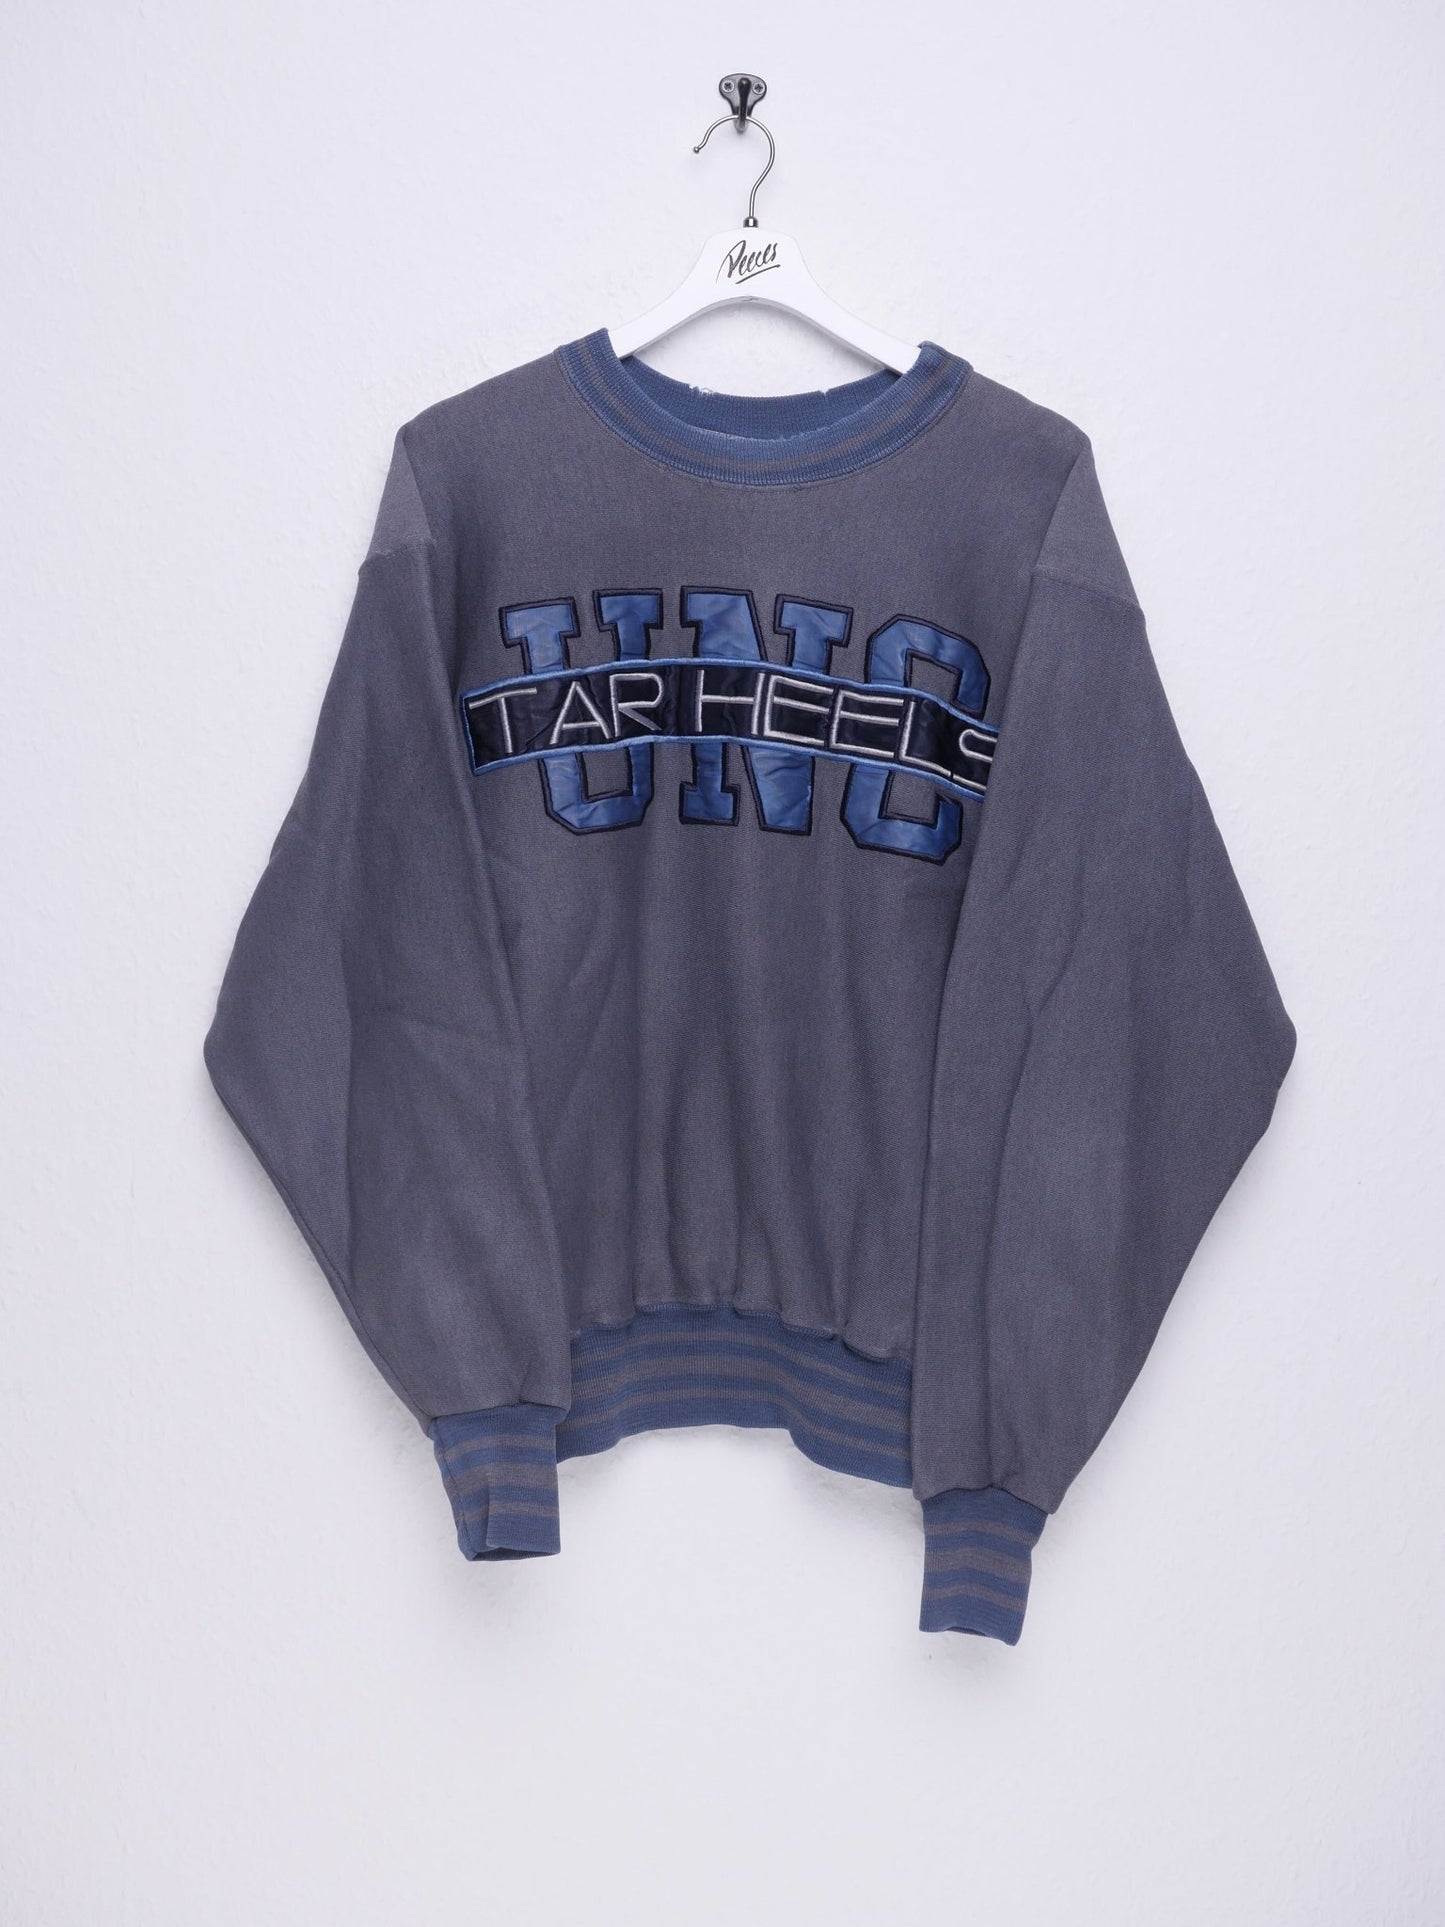 UNC Tar Heels embroidered Spellout grey Sweater - Peeces